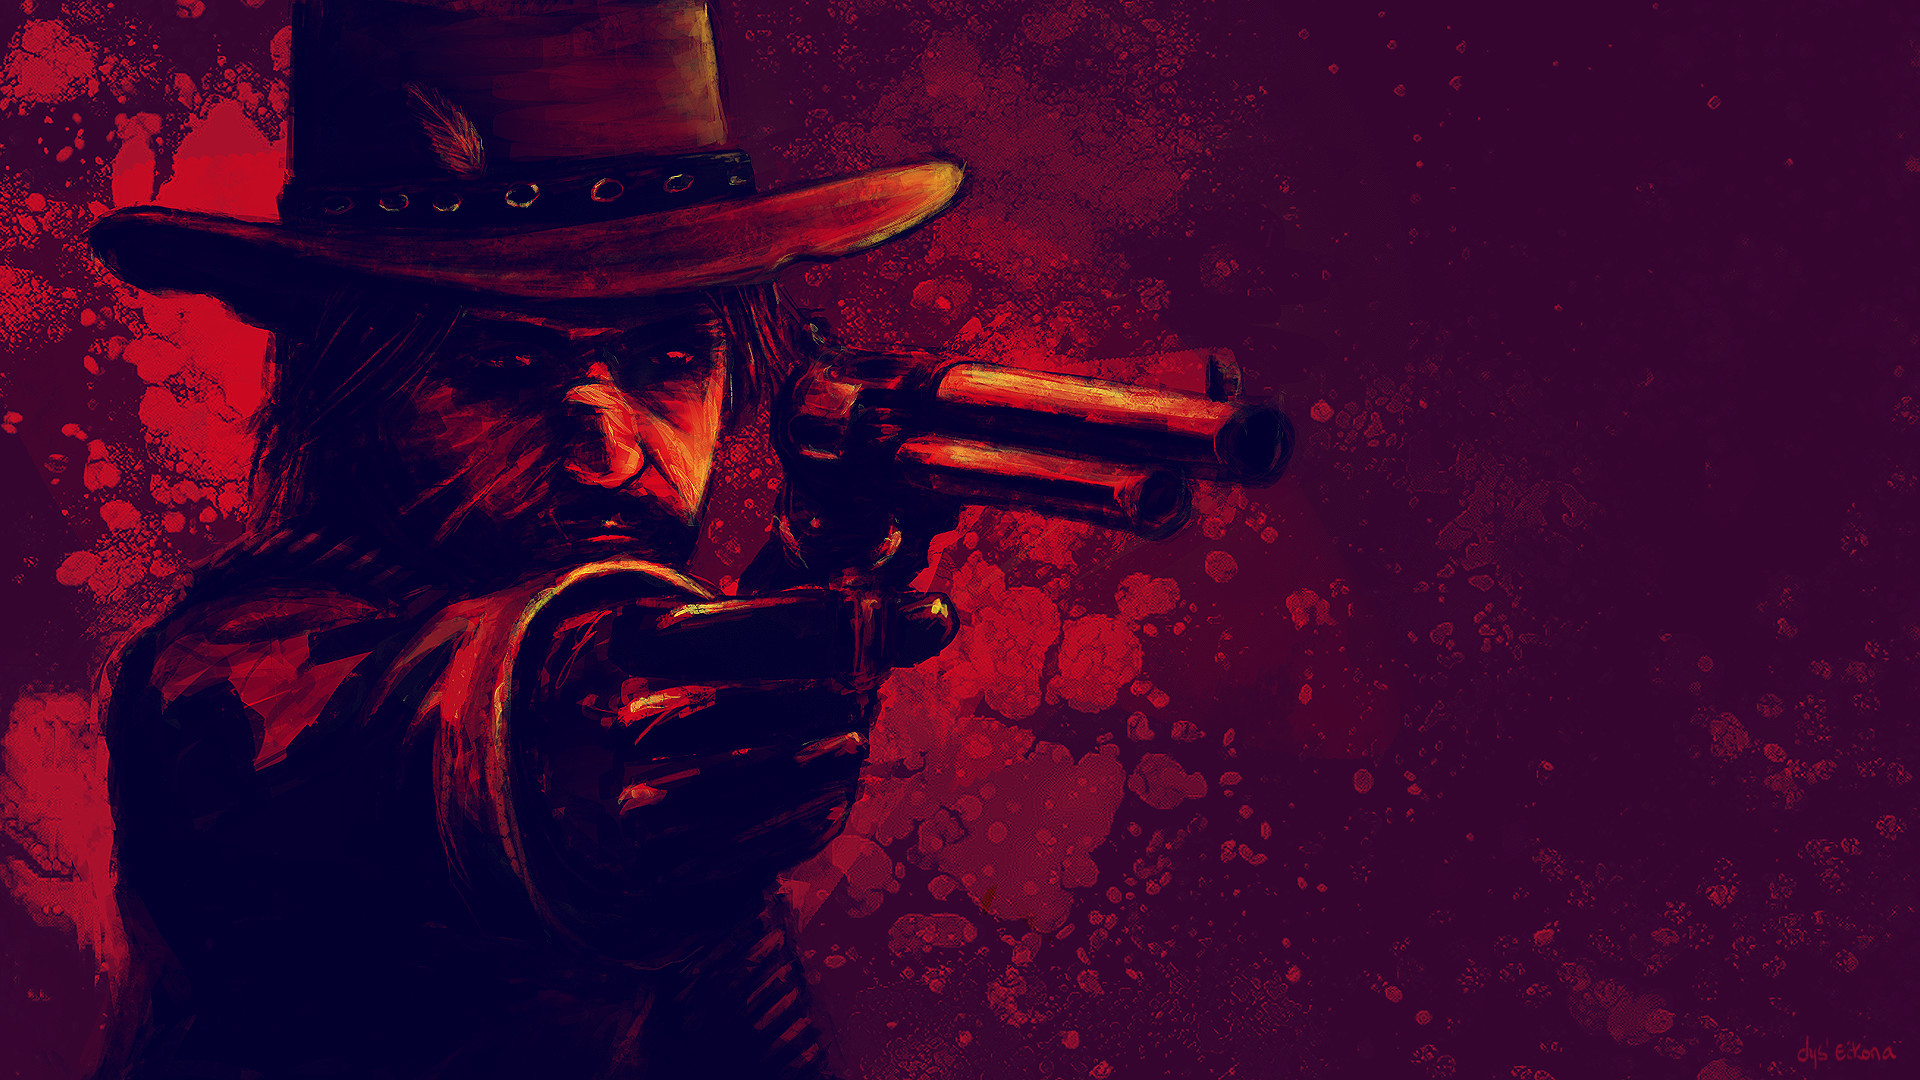 red dead redemption 2, video game, john marston, red dead